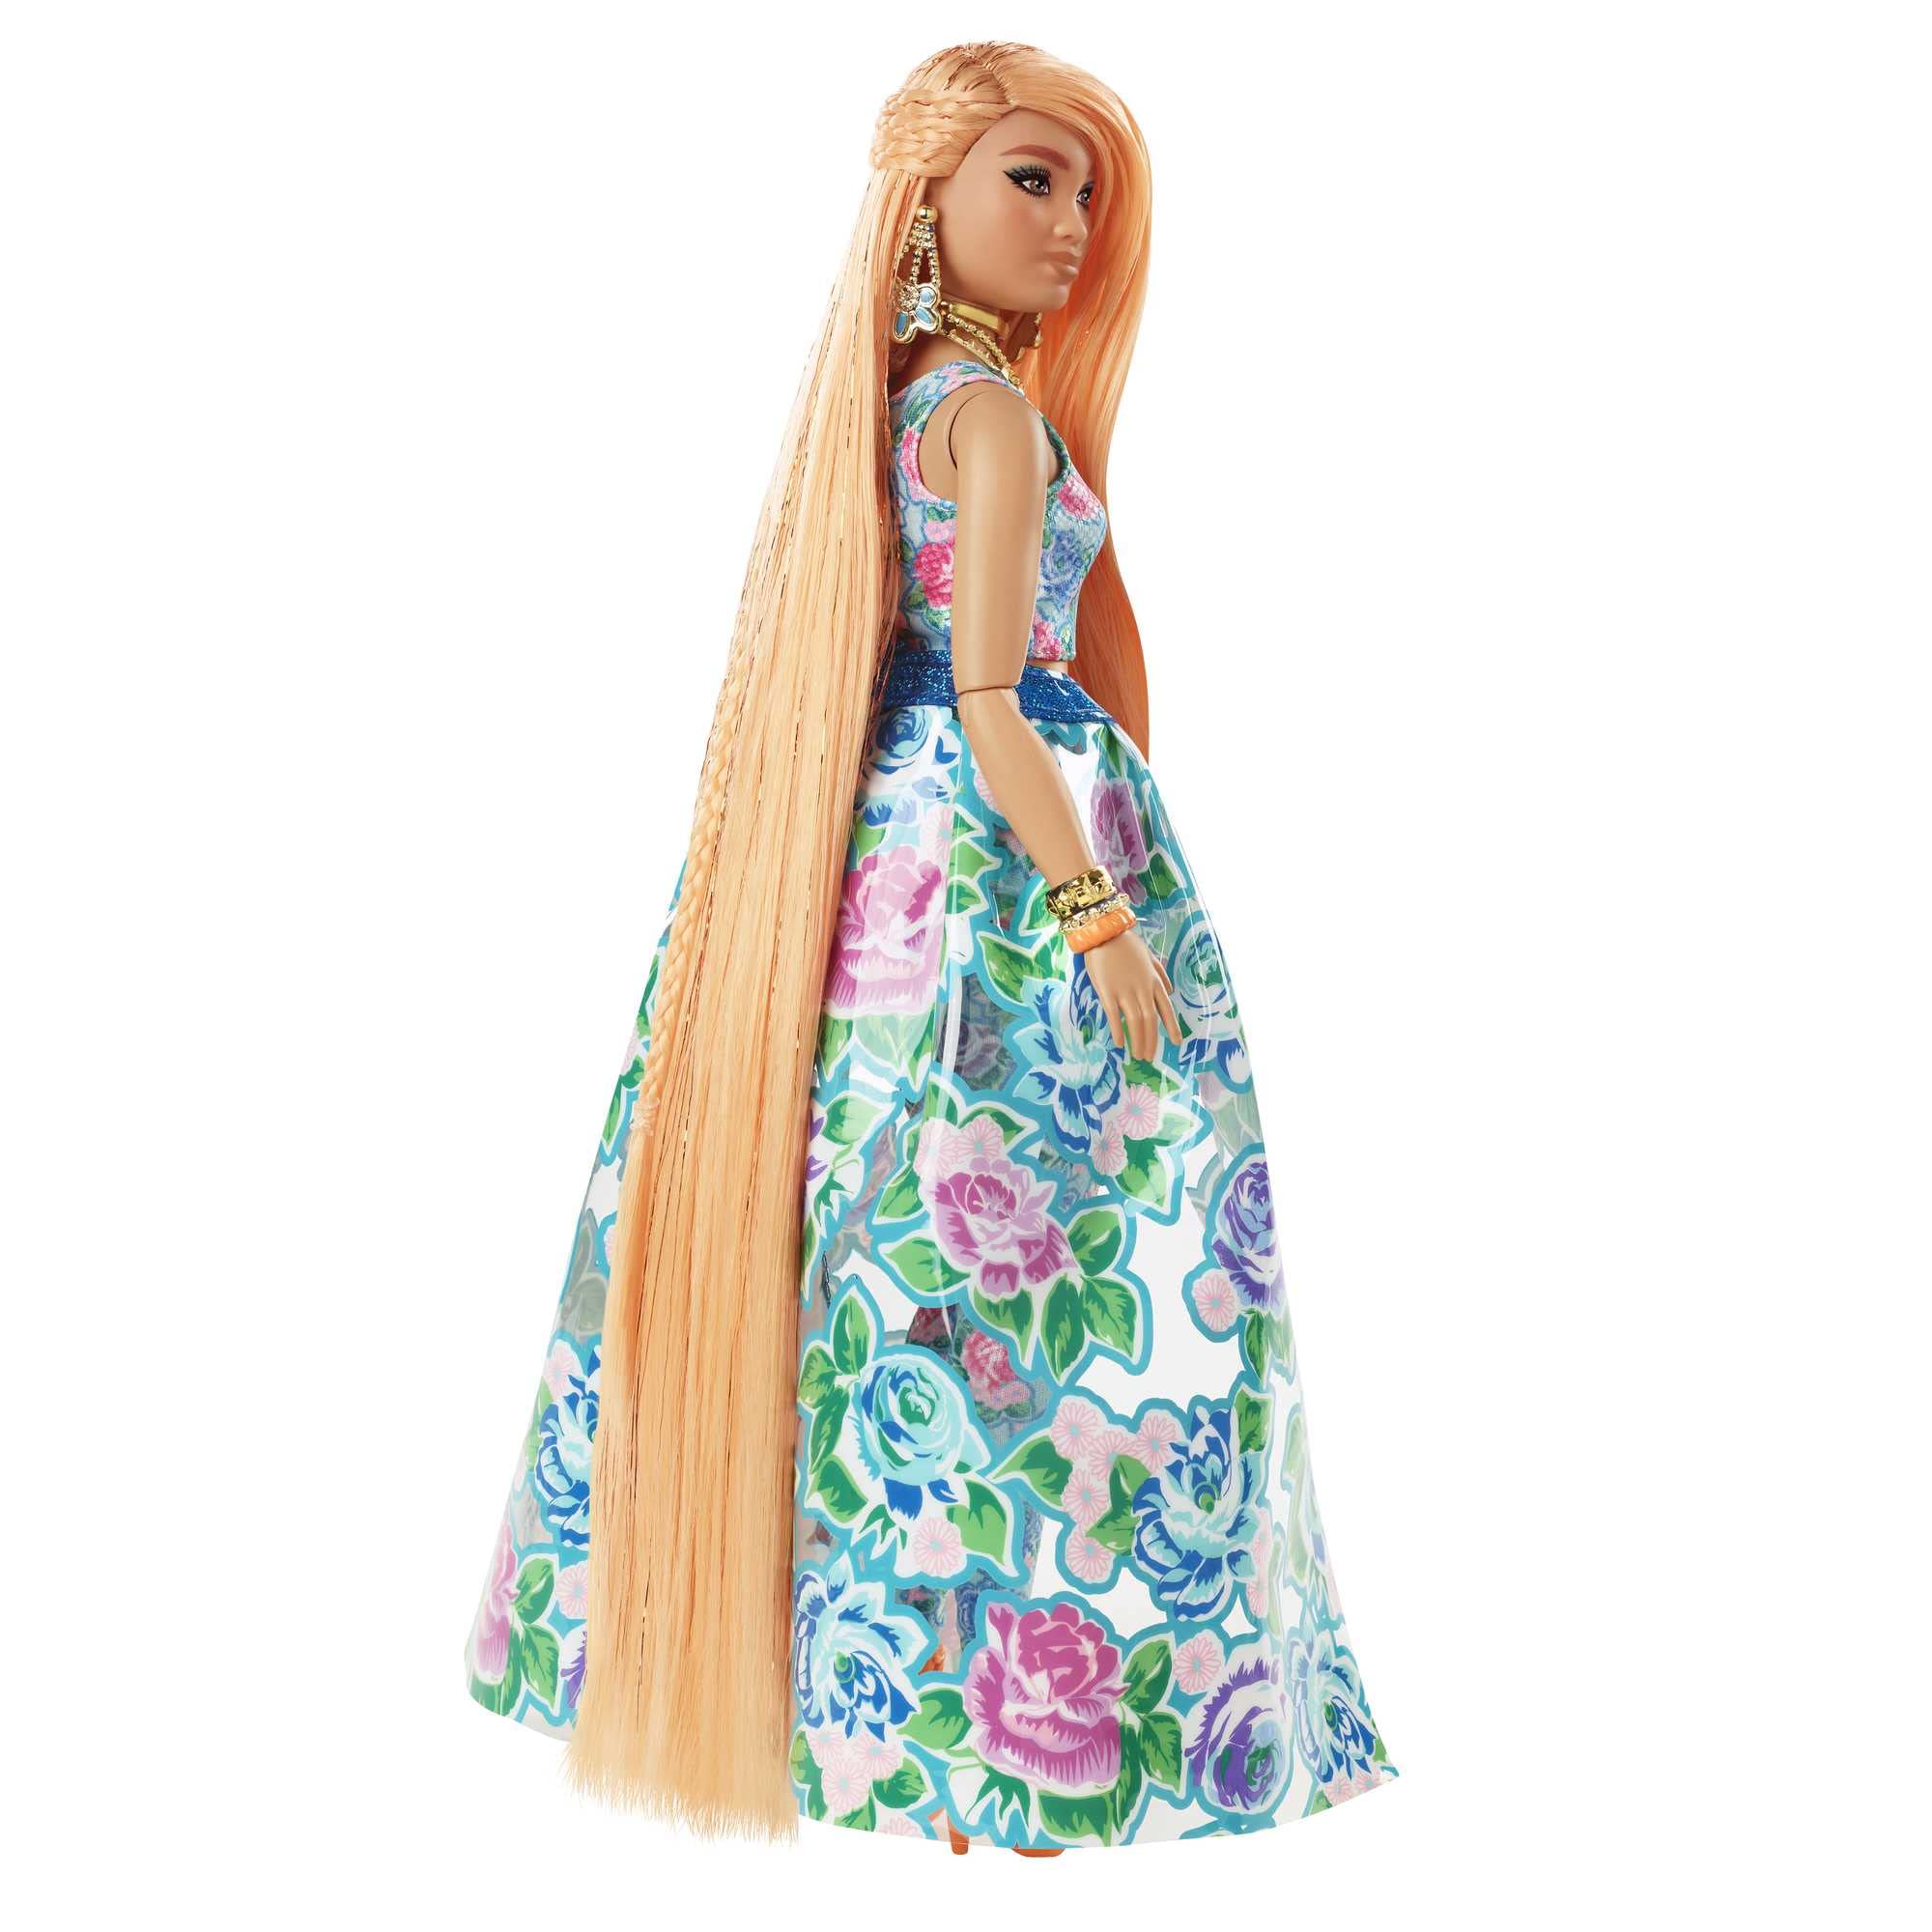 Barbie Extra Fancy Fashion Doll & Accessories with Curvy Shape & Orange Hair in Floral 2-Piece Gown with Pet Kitten